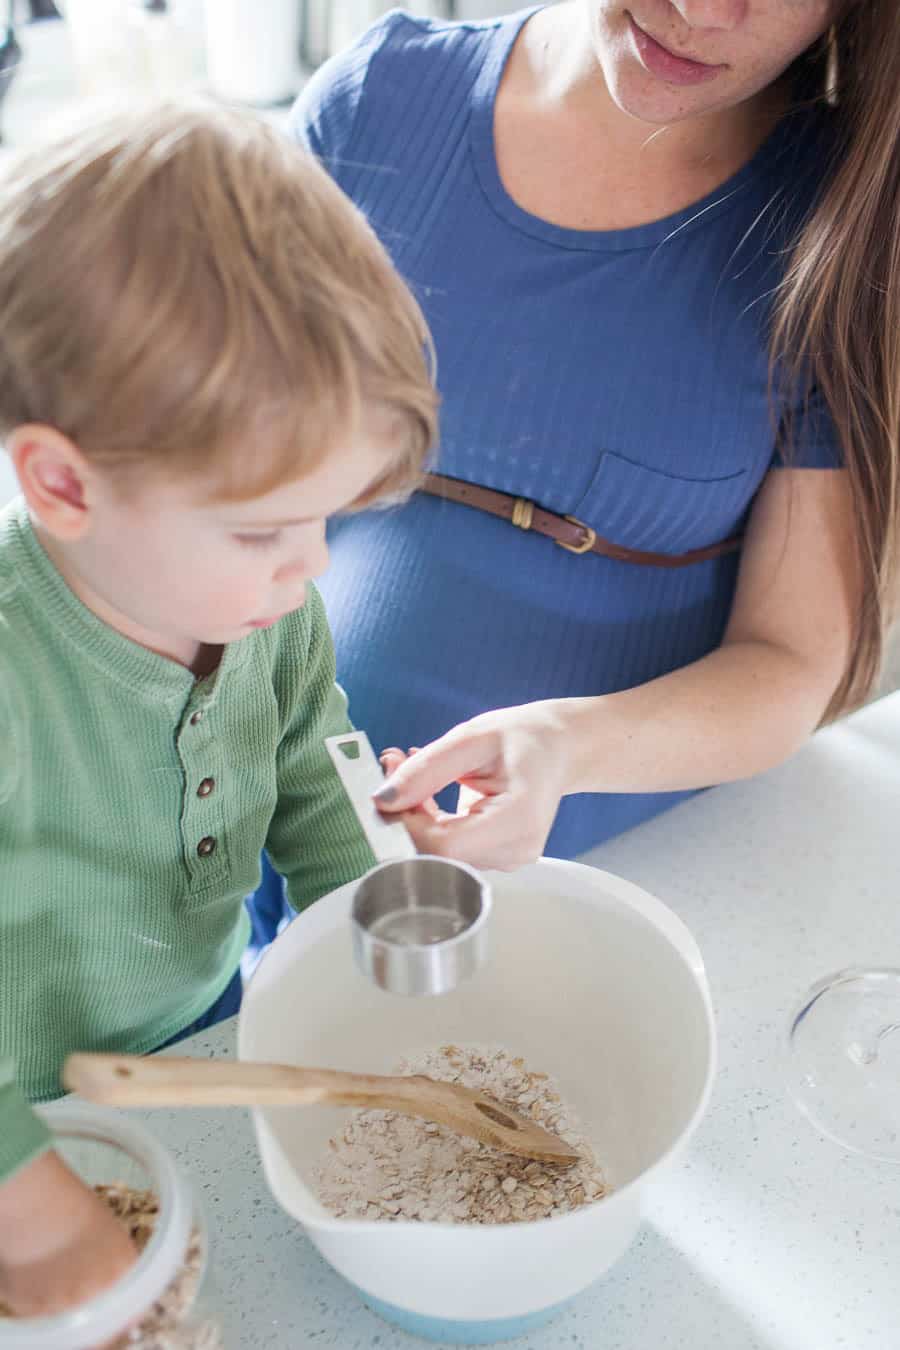 Teaching your toddler to help in the kitchen can be a daunting task, but it's one that can take away the stress of having to keep an eye on your kiddos while trying to prep dinner or a snack. Teaching your little ones about being in the kitchen can be fun and stressless with a few quick tips for cooking with toddlers!